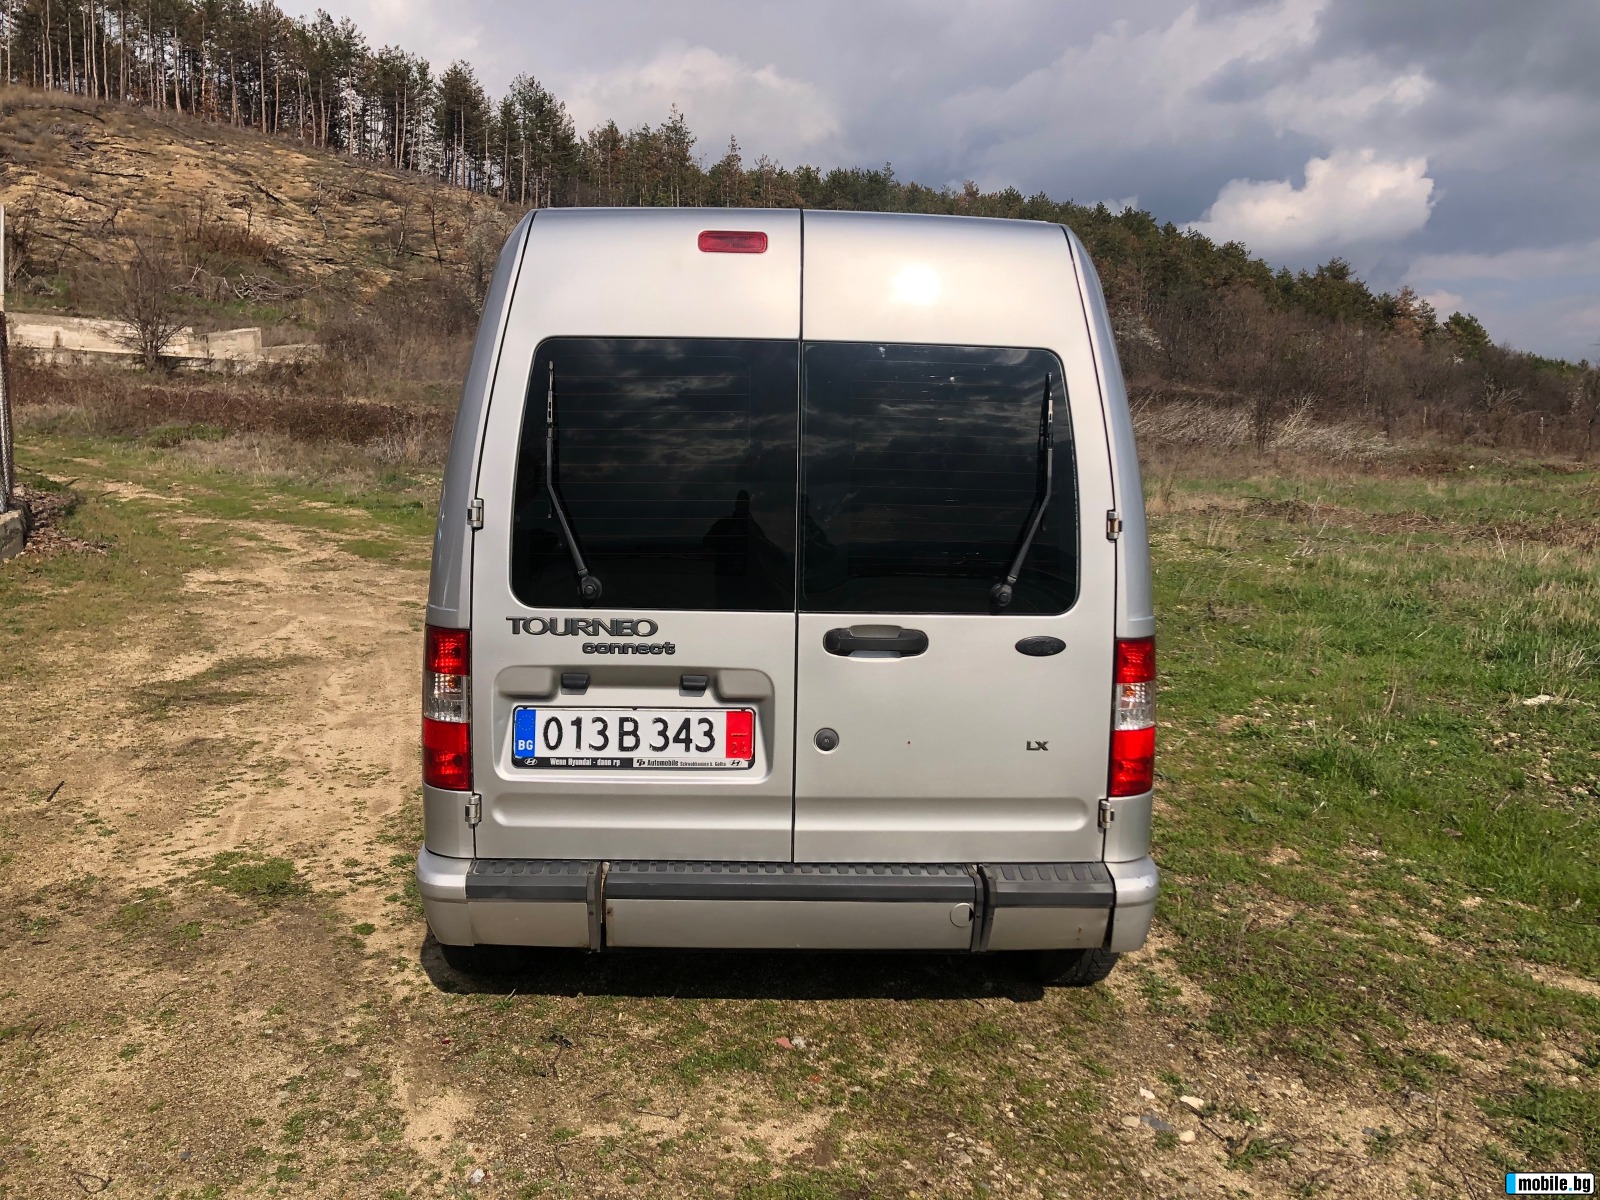 Ford Connect 1.8TDCI TOURNEO XL | Mobile.bg   5